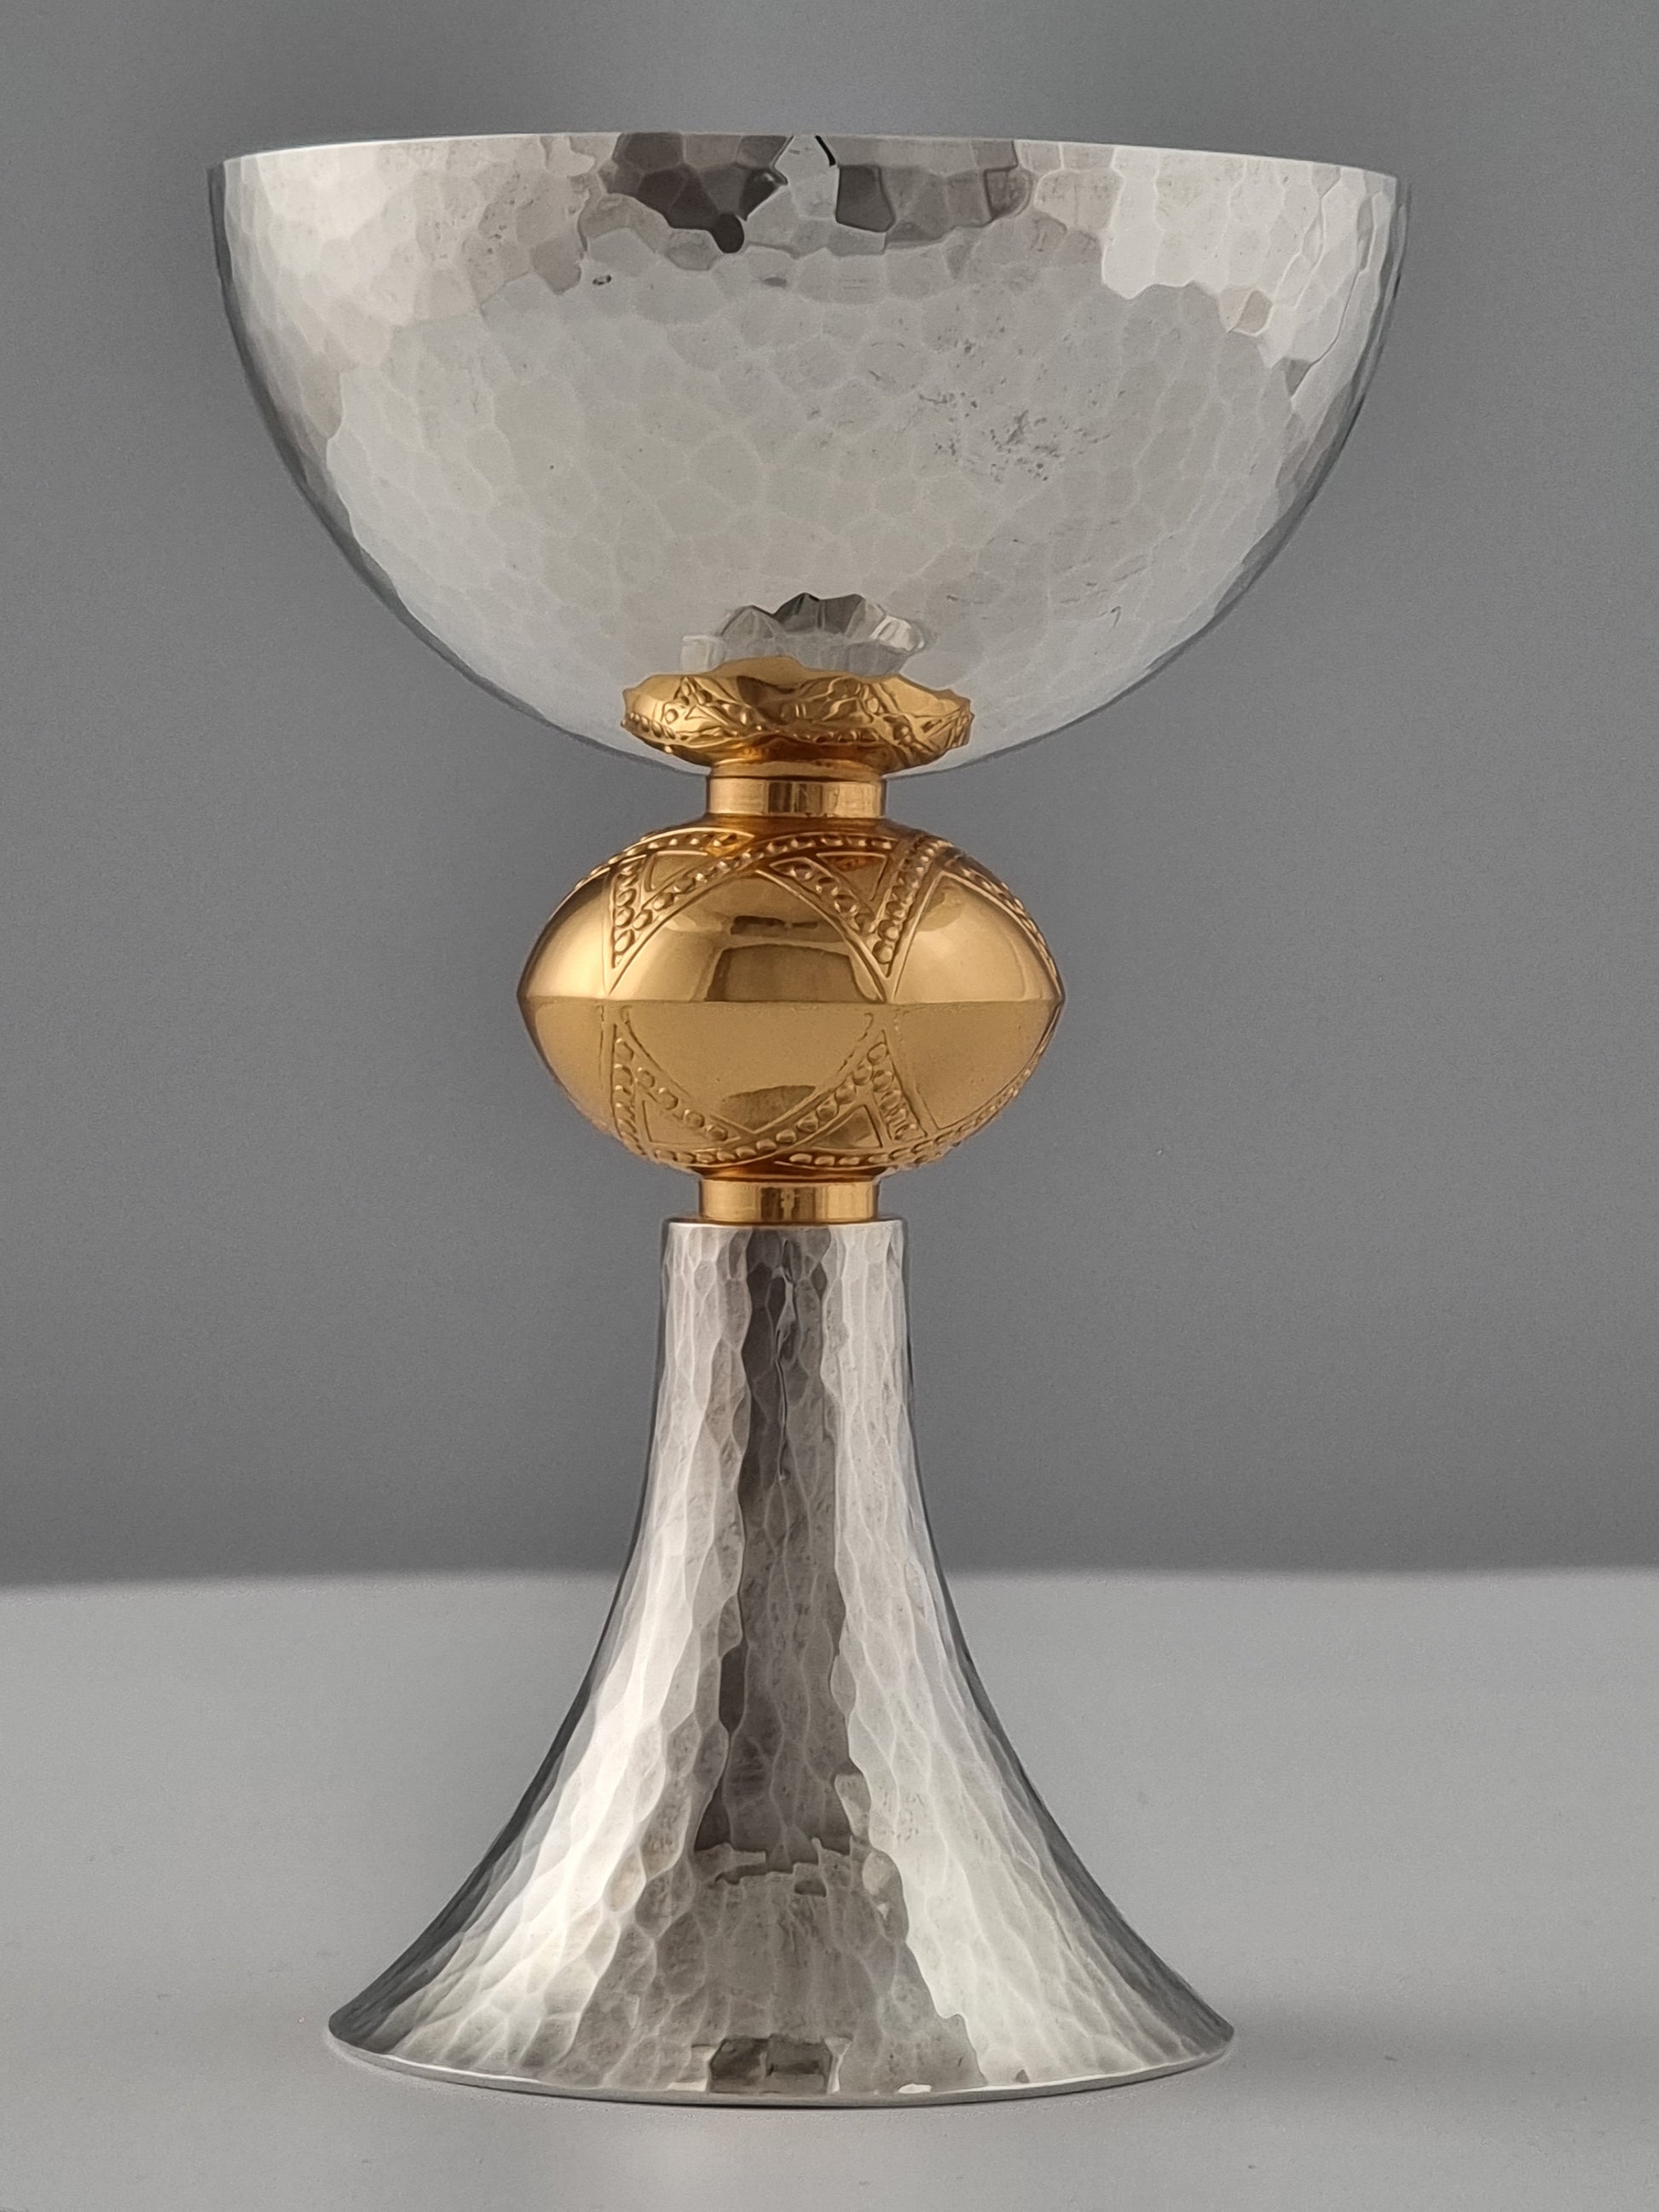 Front view of David Kiddush cup. The gold plated sphere has two stars of David.